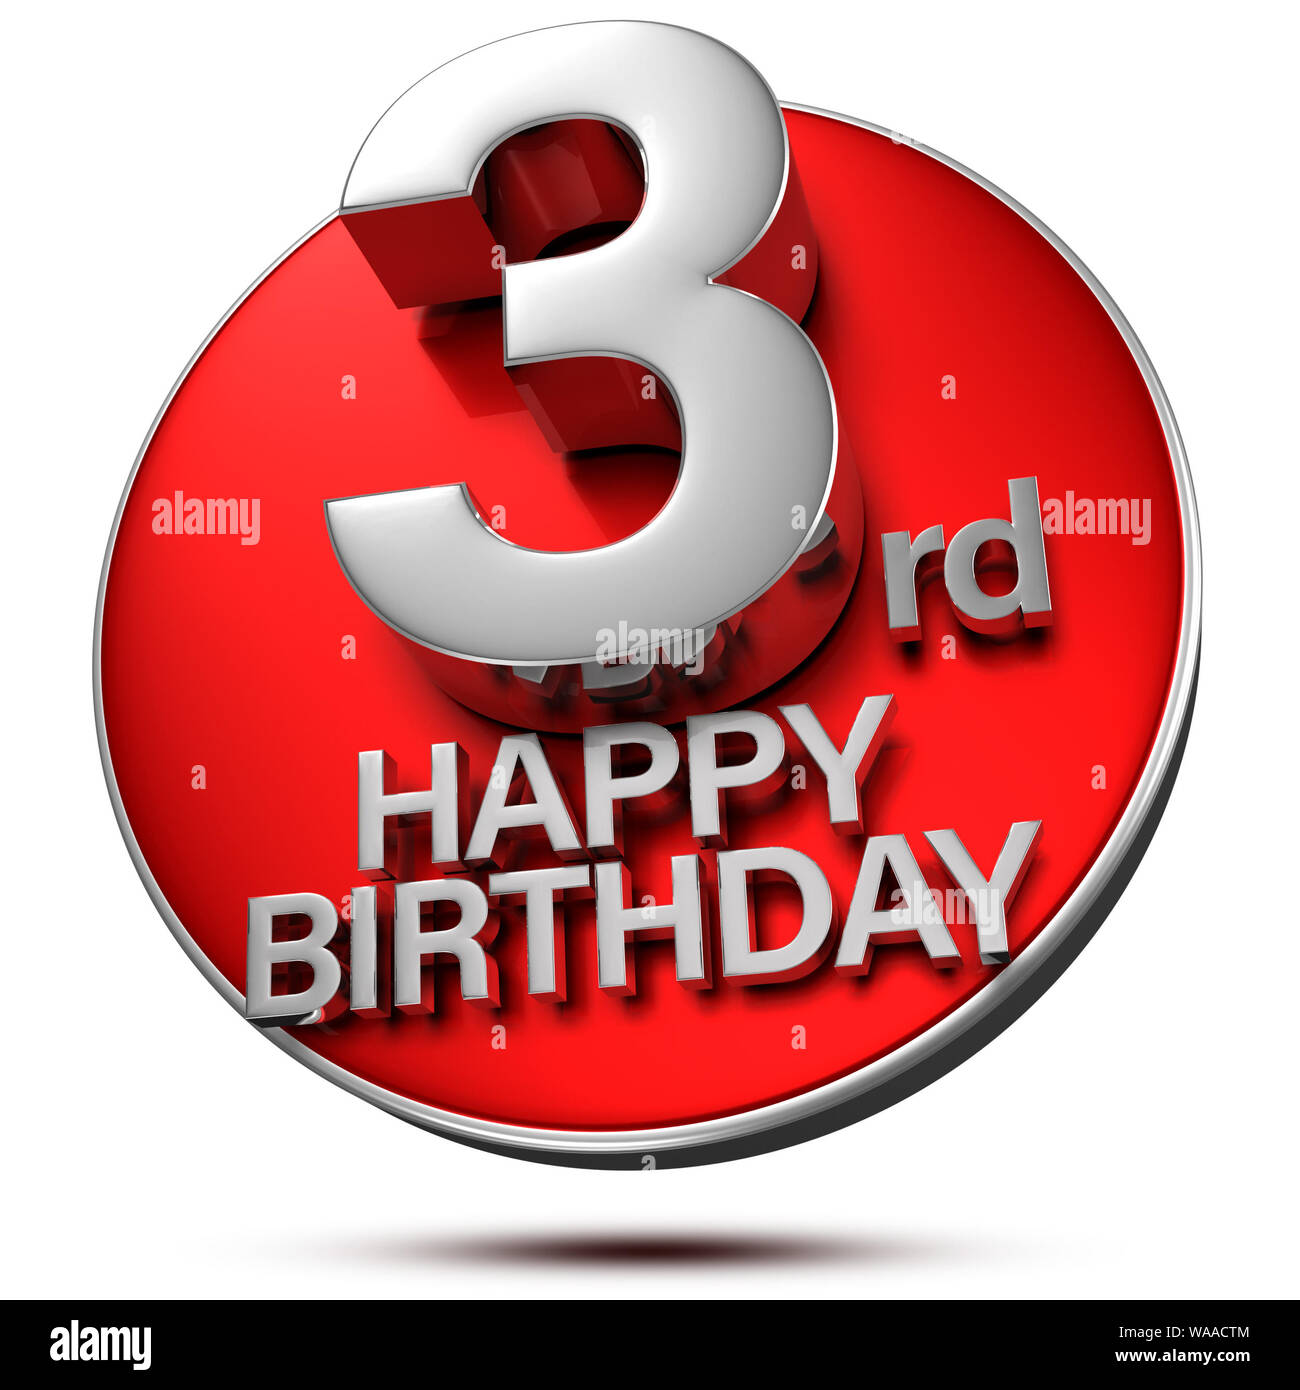 3 Rd Happy Birthday 3d Rendering On White Background With Clipping Path Stock Photo Alamy